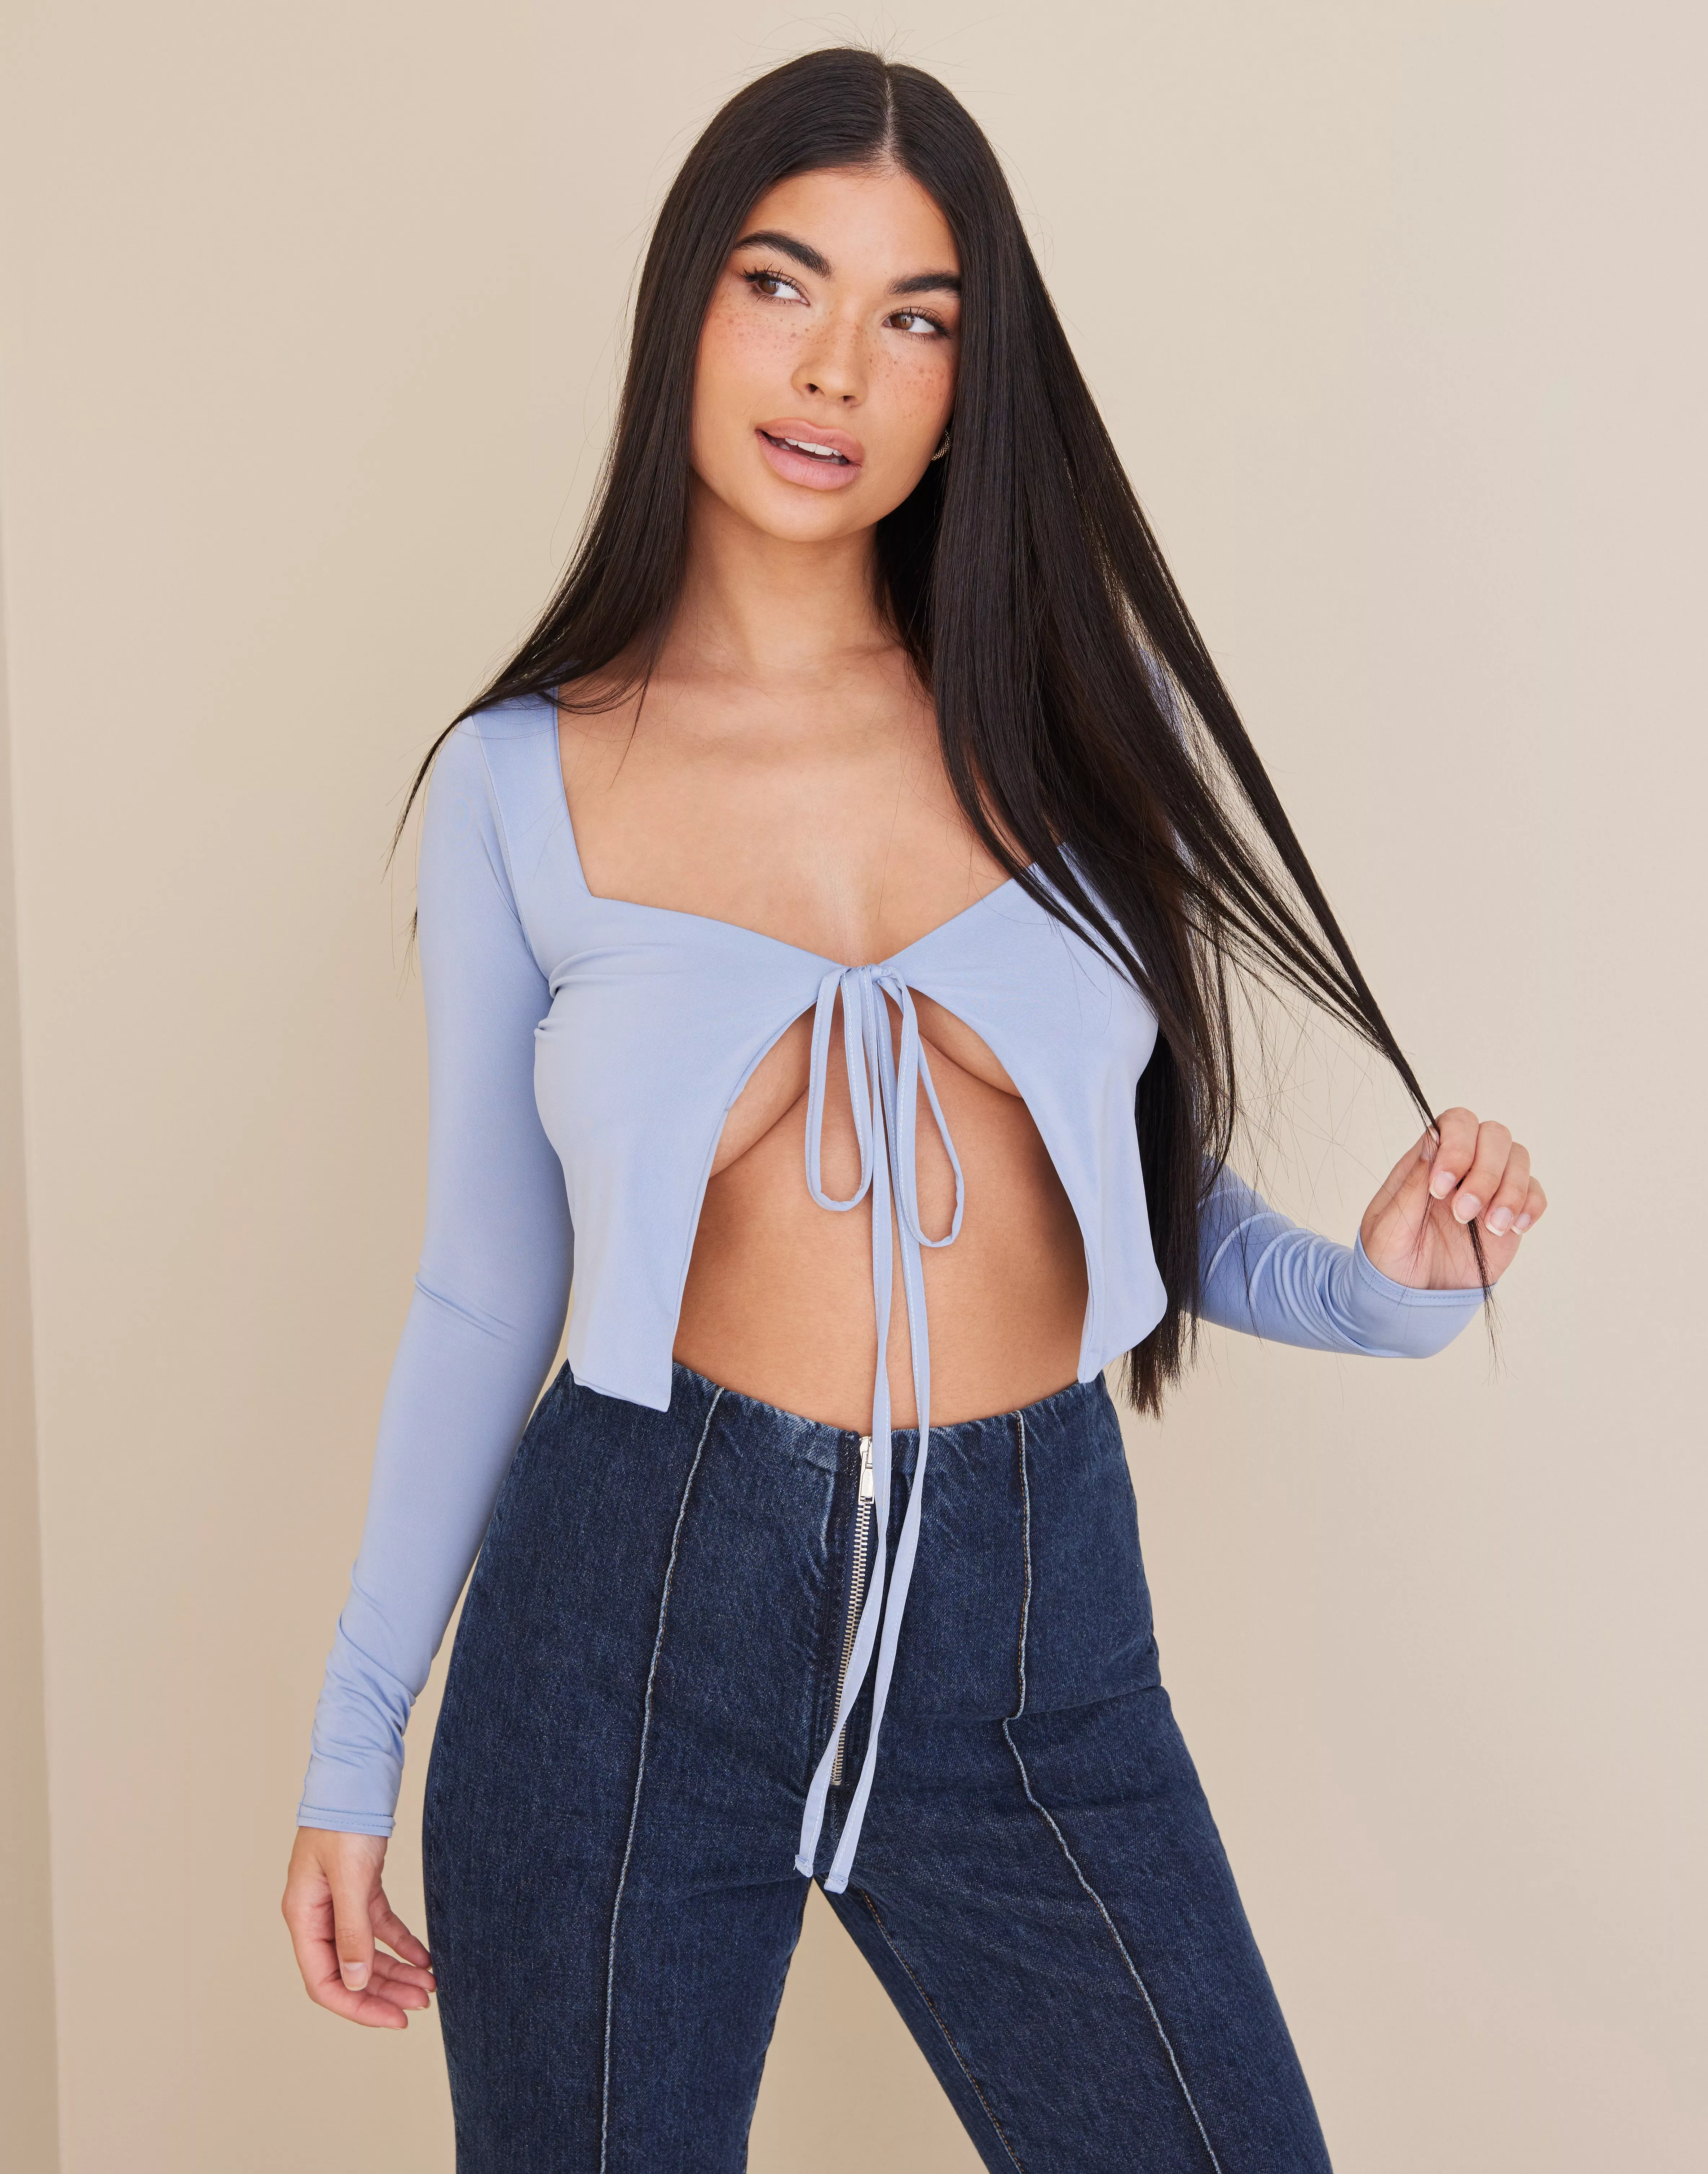 Transformer Tochi træ vulgaritet Buy Missguided LONG SLEEVE TIE FRONT CROP TOP - Blue | Nelly.com